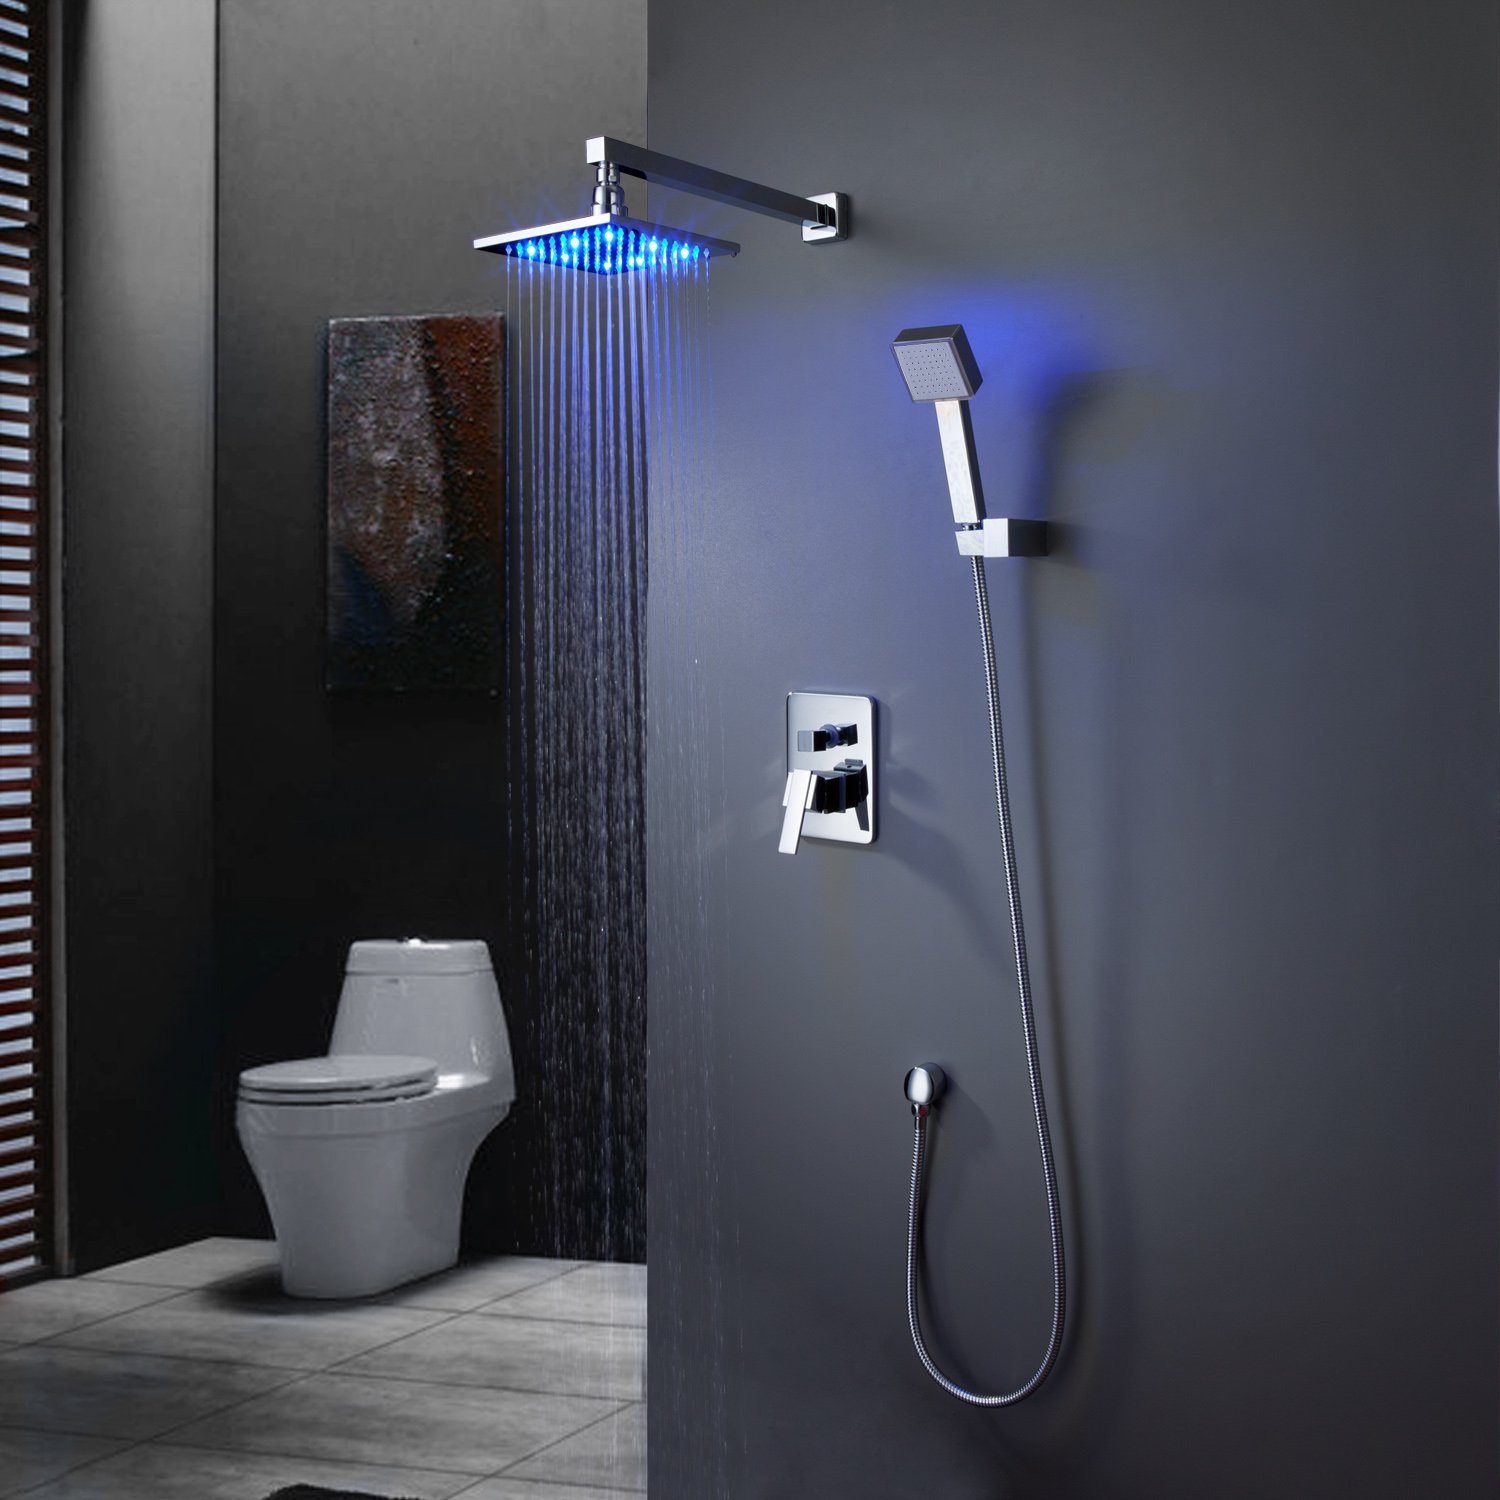 Installation Instructions for LED Mixer Shower Head With Thermostatic Mixer